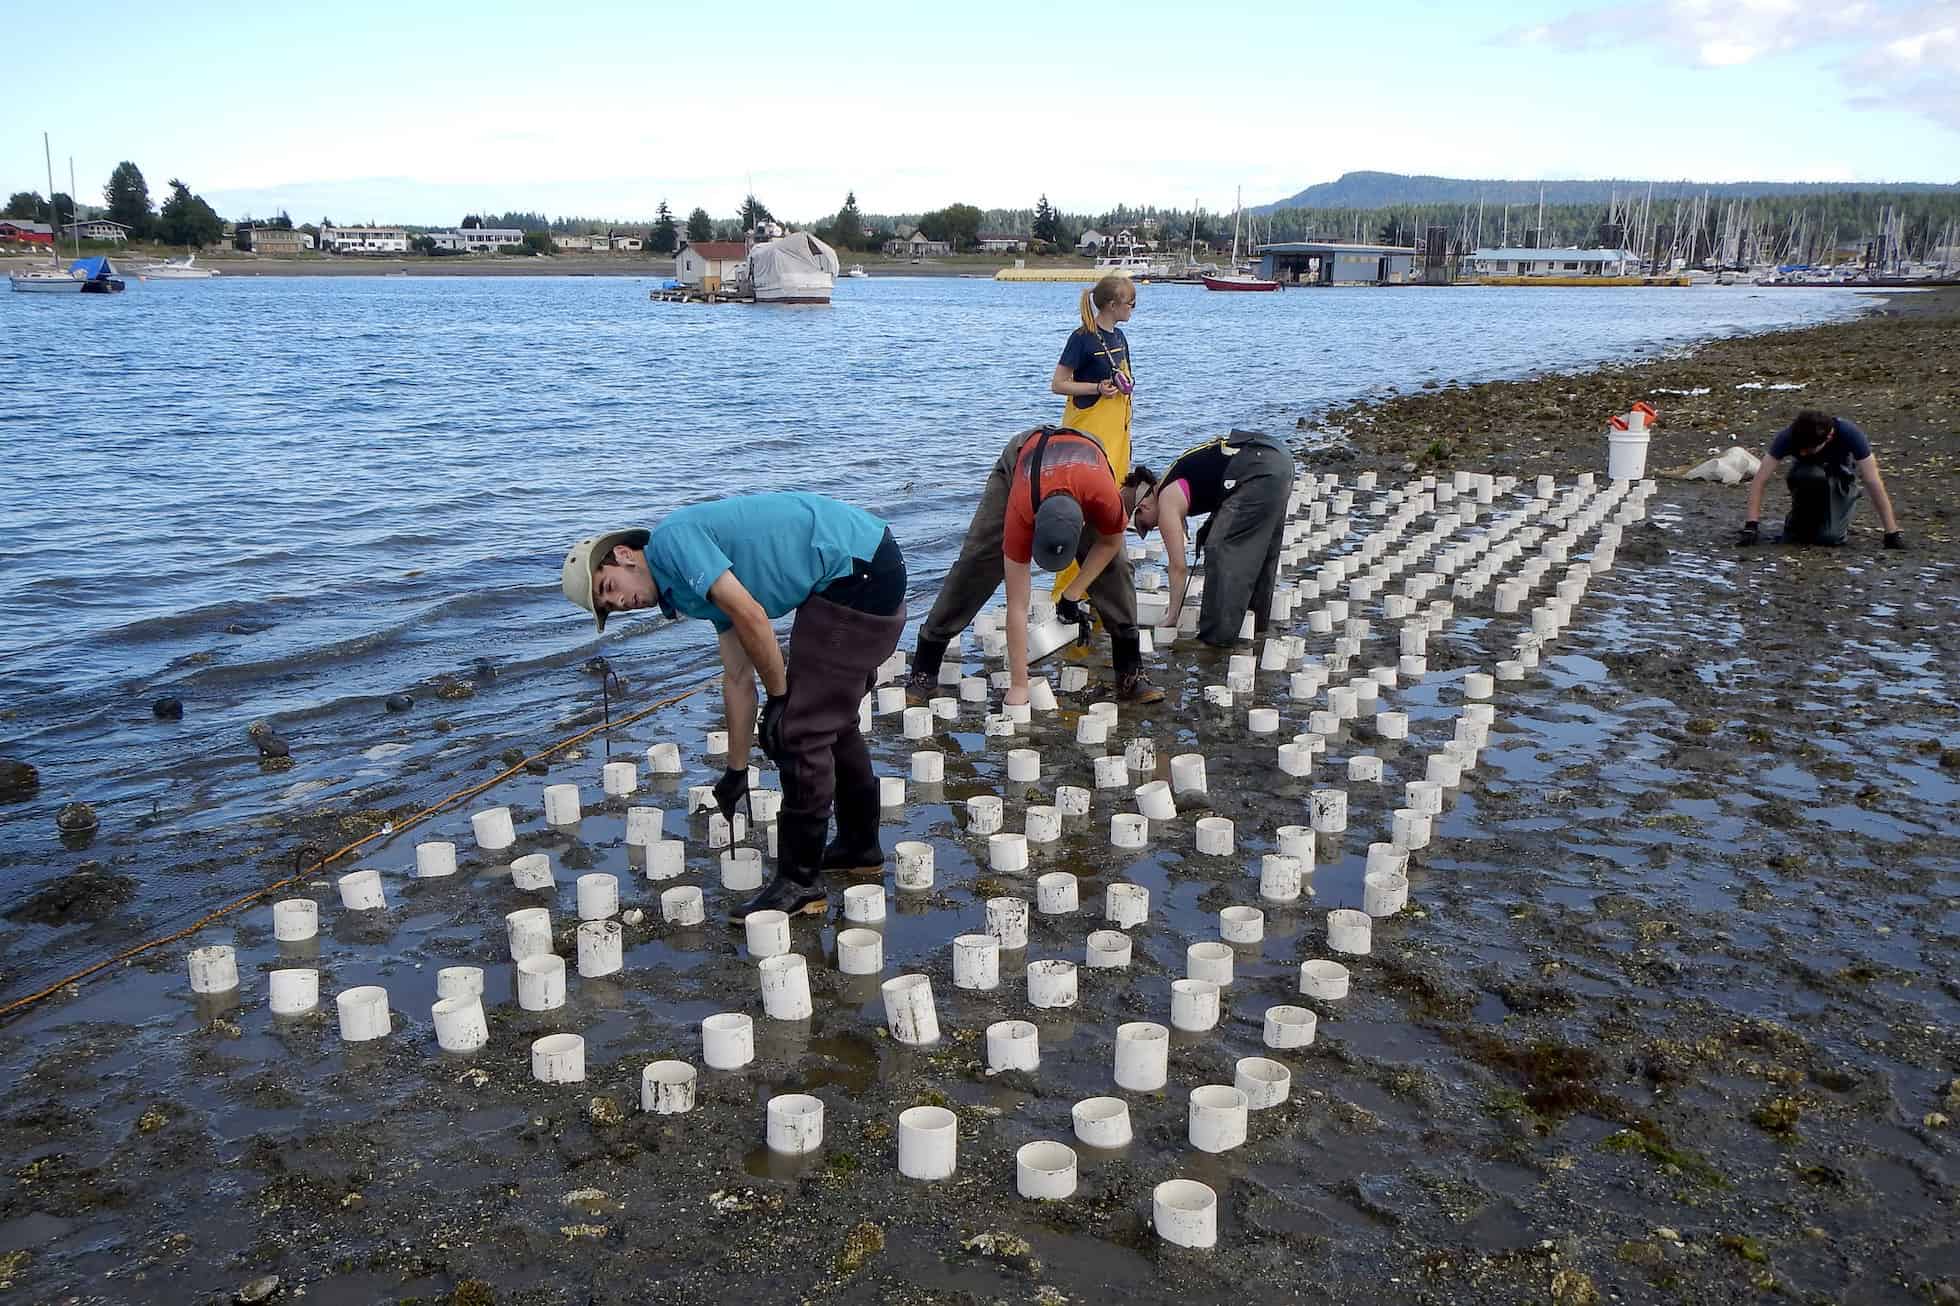 People planting geoducks in tubes on the mudflats